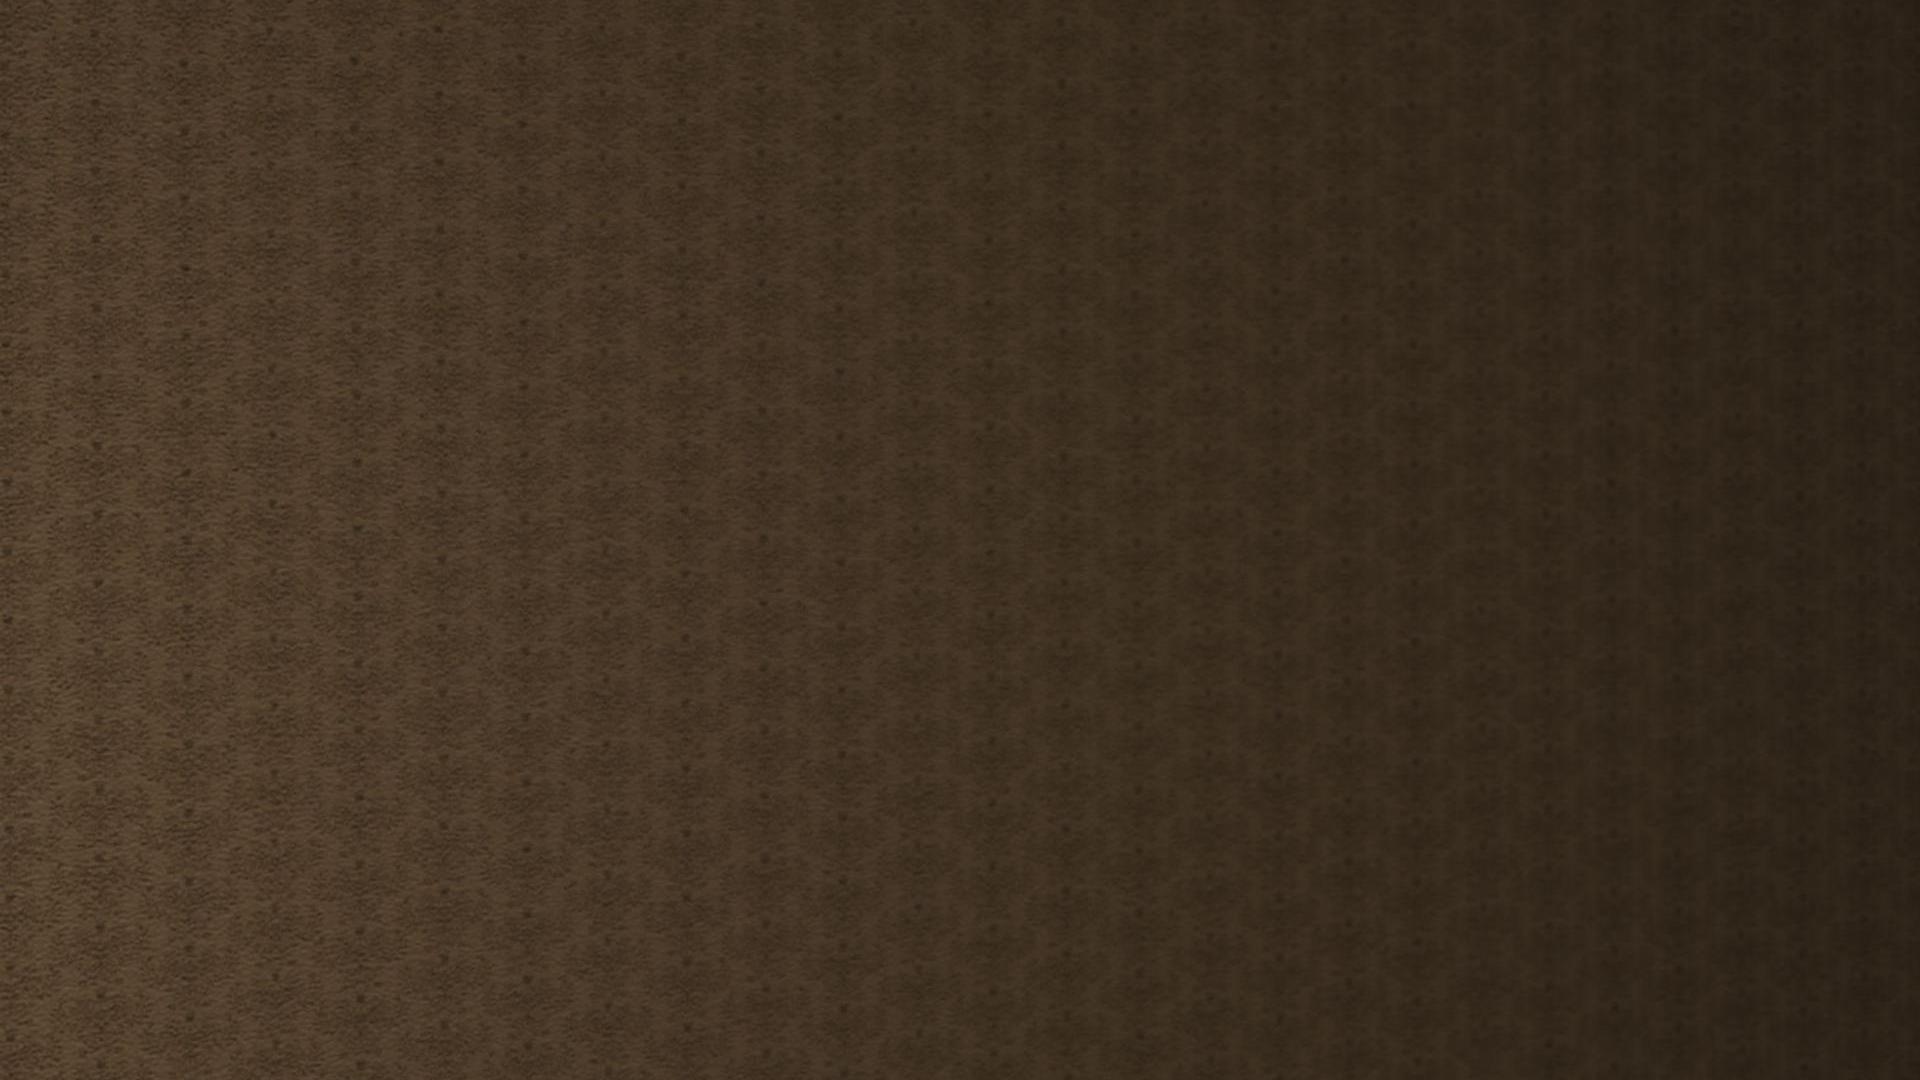 HD Brown ppt background template